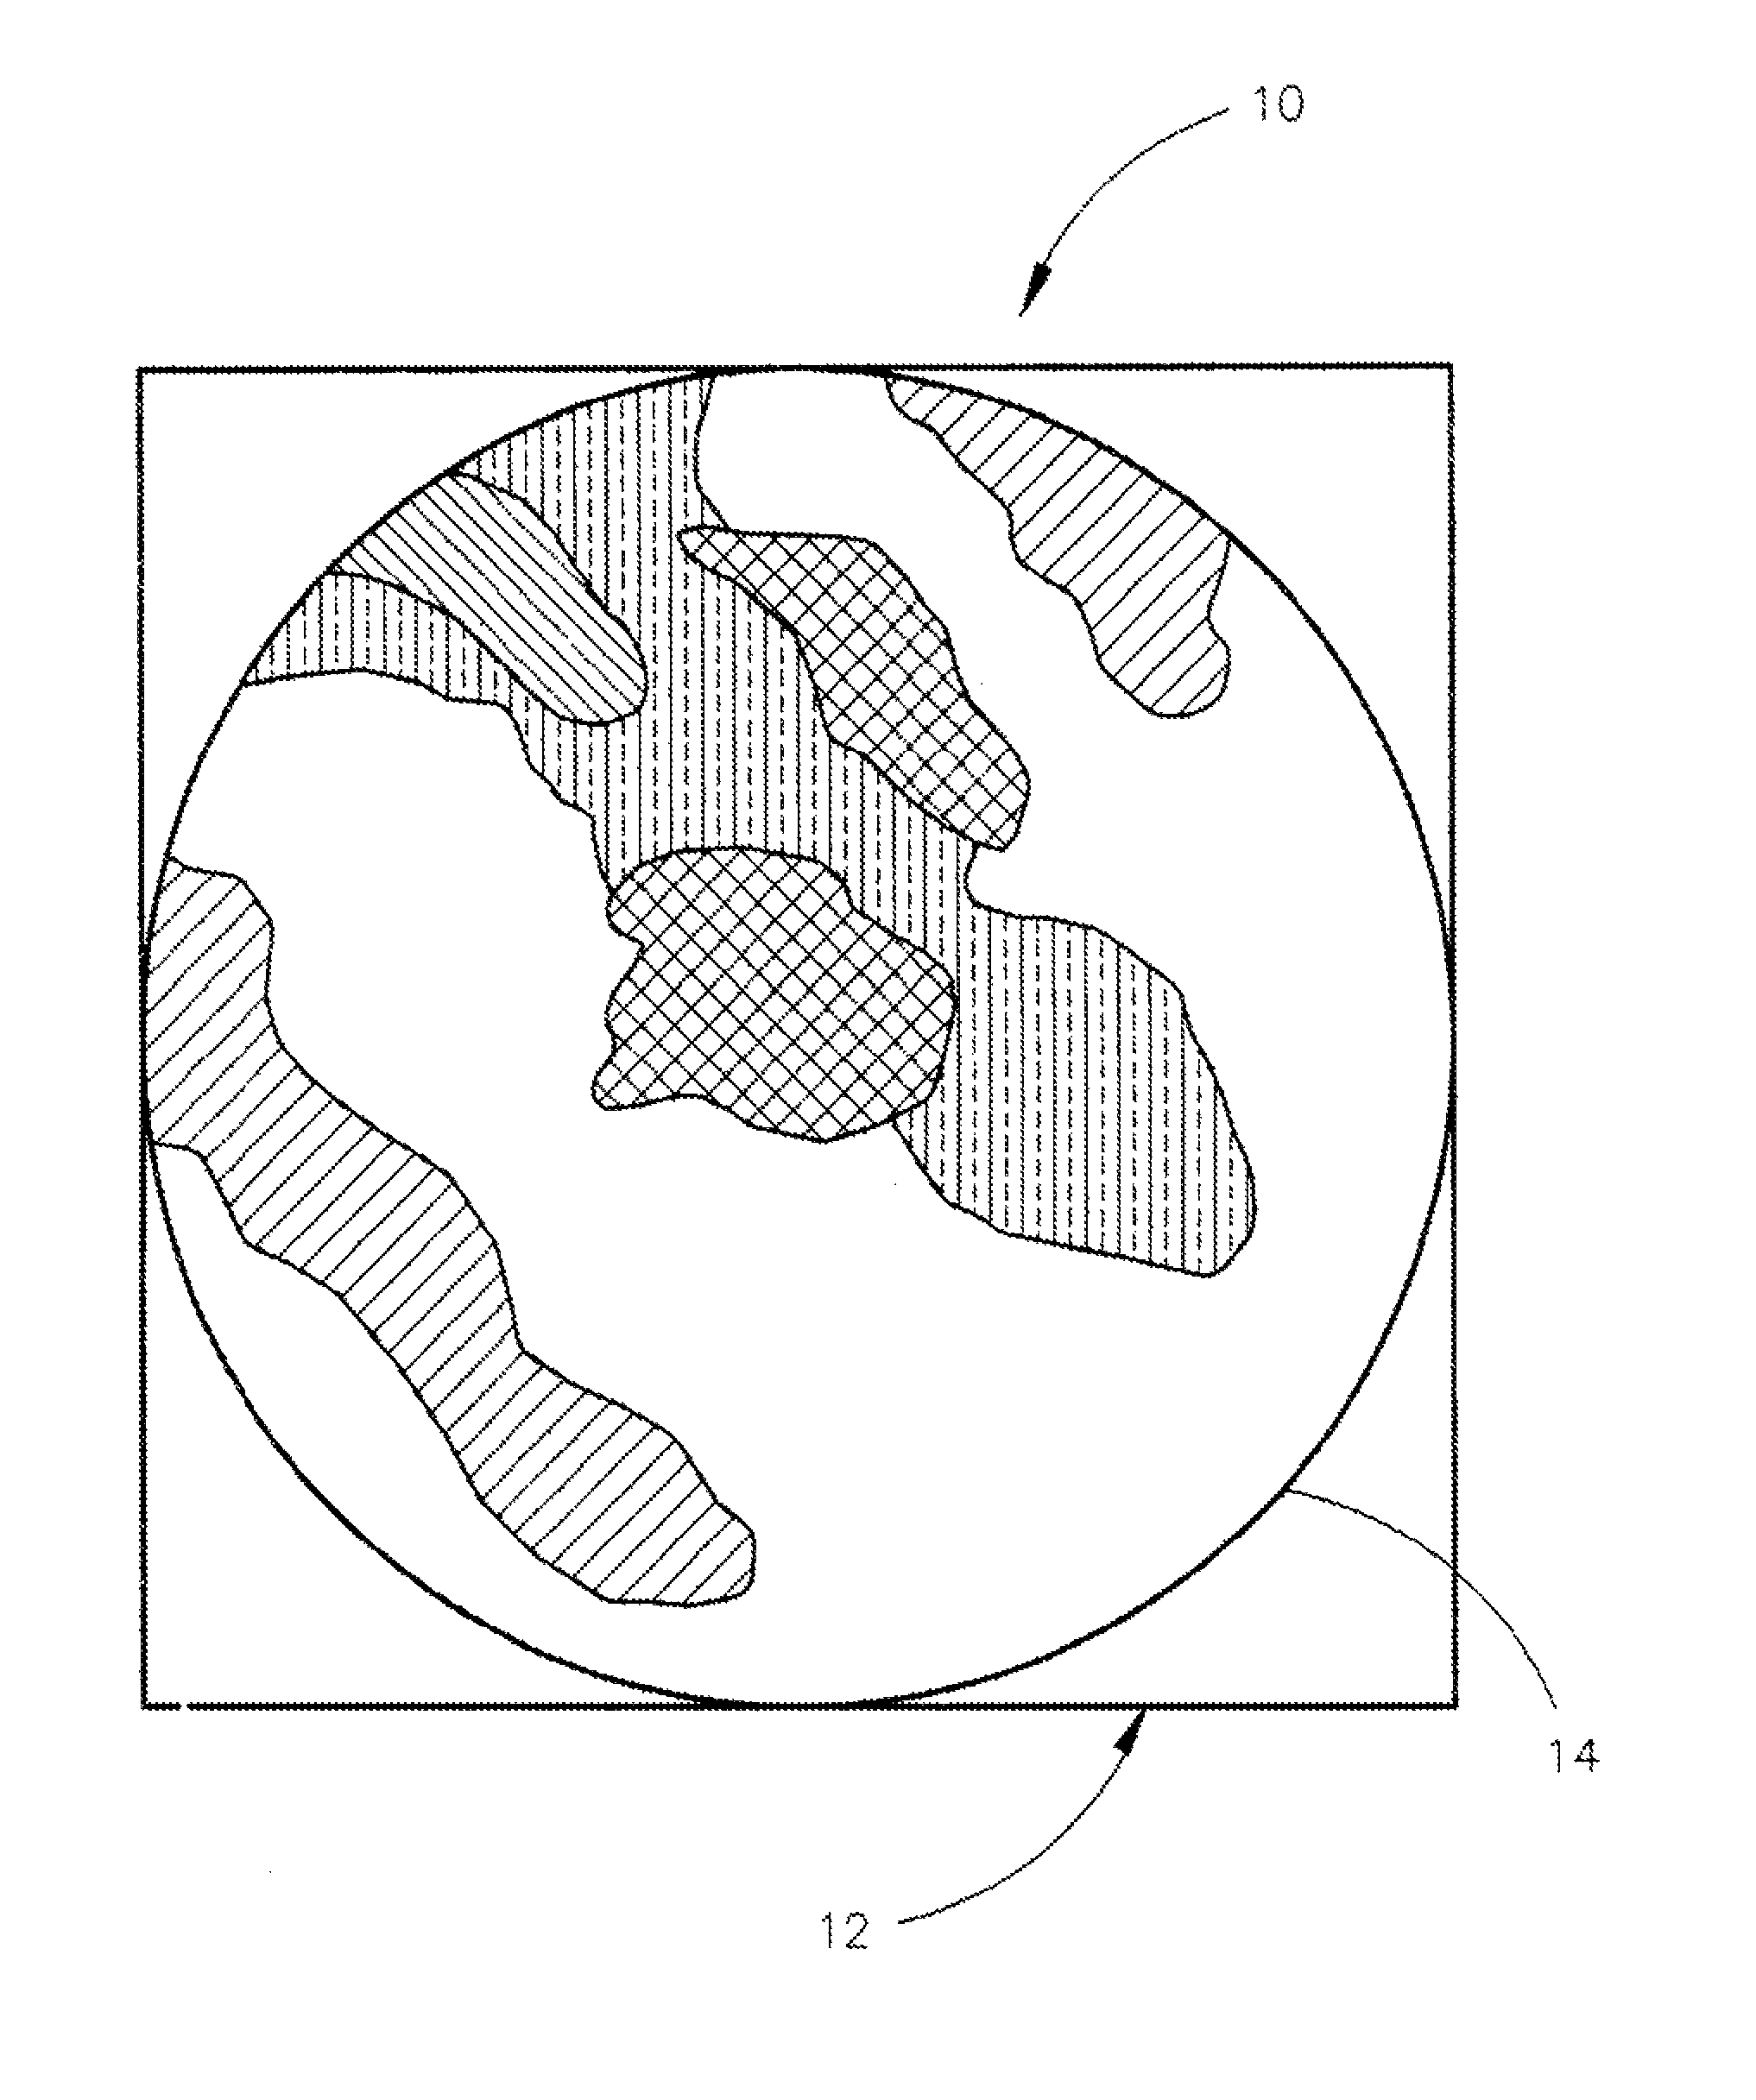 Method of controlling the irrigation of a field with a center pivot irrigation system